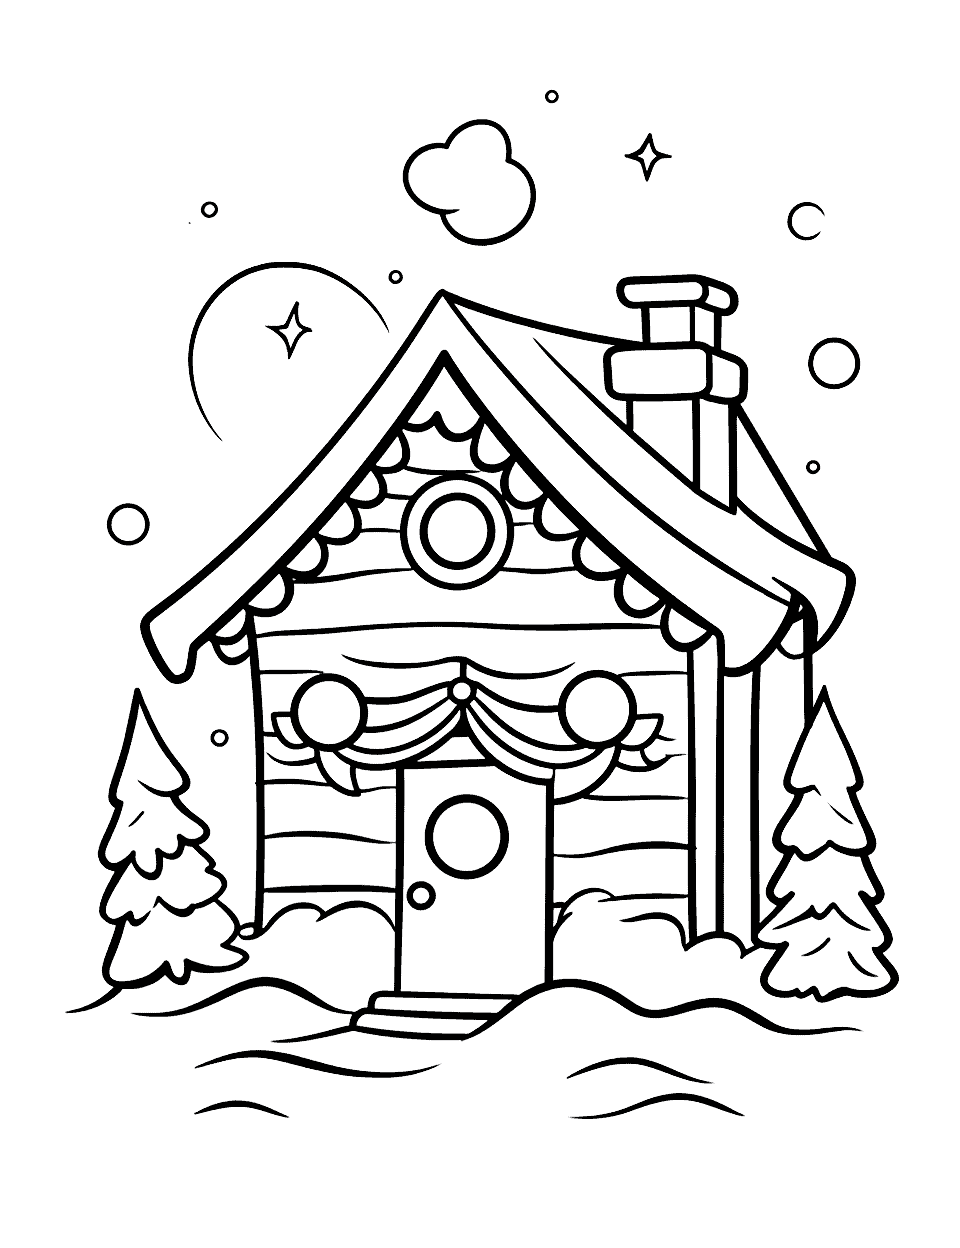 Cozy Christmas Cabin Coloring Page - A cozy cabin nestled in the snow.